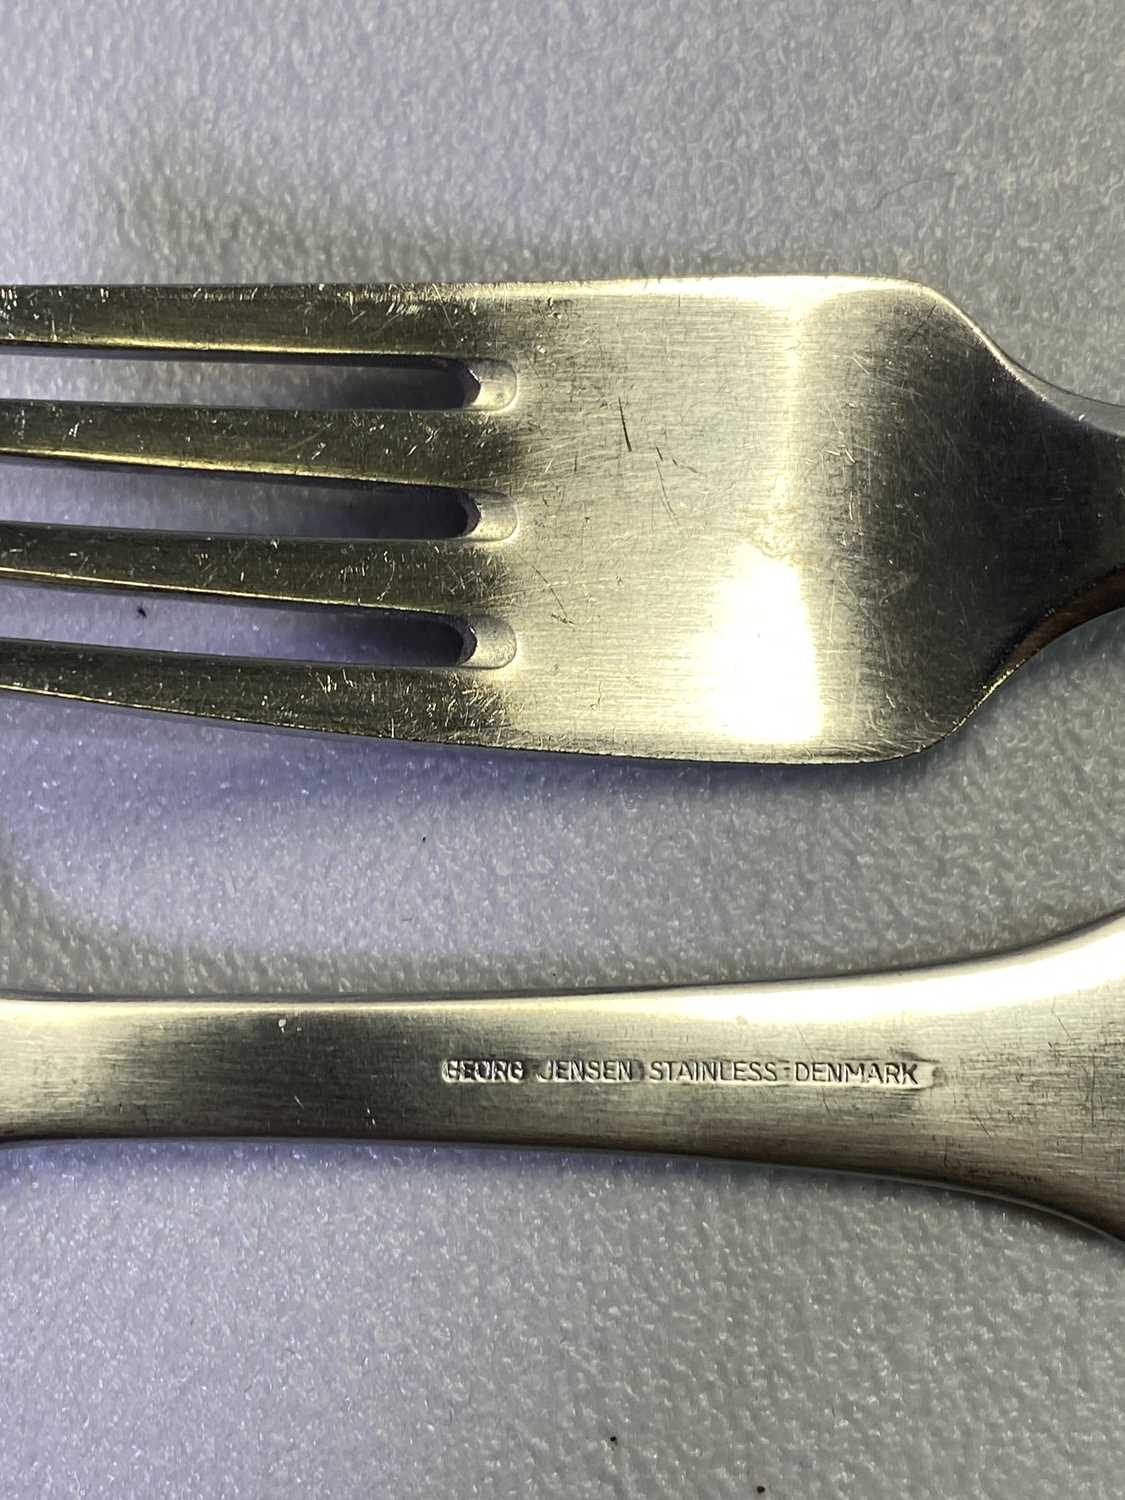 GEORGE JENSEN DENMARK 'MITRA' STAINLESS STEEL MODERN CUTLERY, approximately 60 pieces, and an - Image 7 of 9